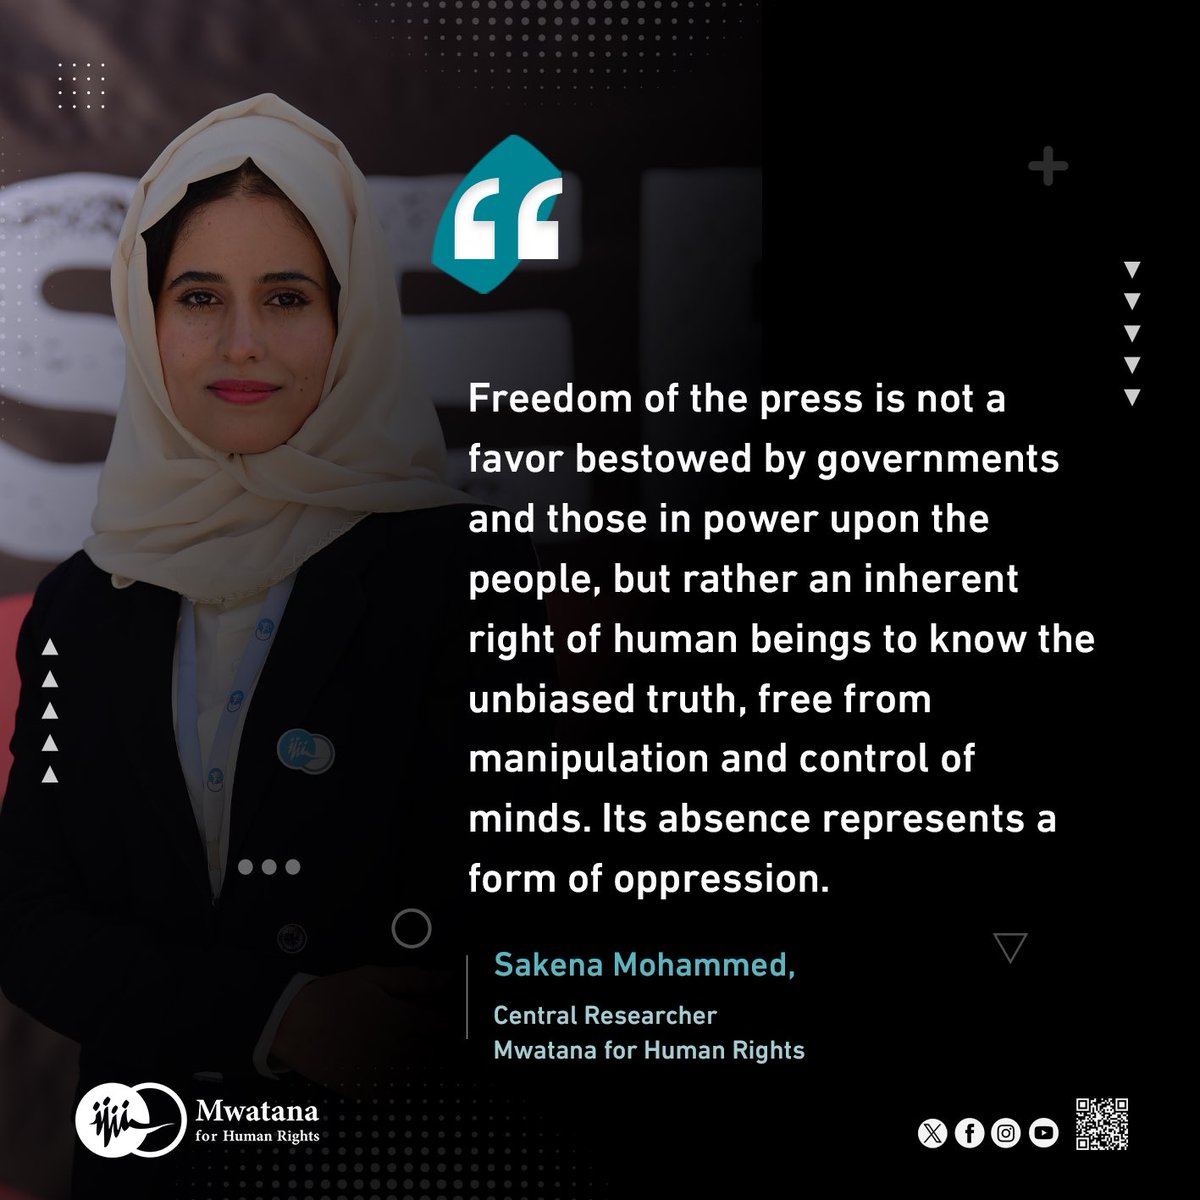 'Freedom of the #press is not a favor bestowed by governments and those in power upon the people, but rather an inherent #right of human beings to know the unbiased #truth, free from manipulation and control of minds. Its absence represents a form of #oppression.'